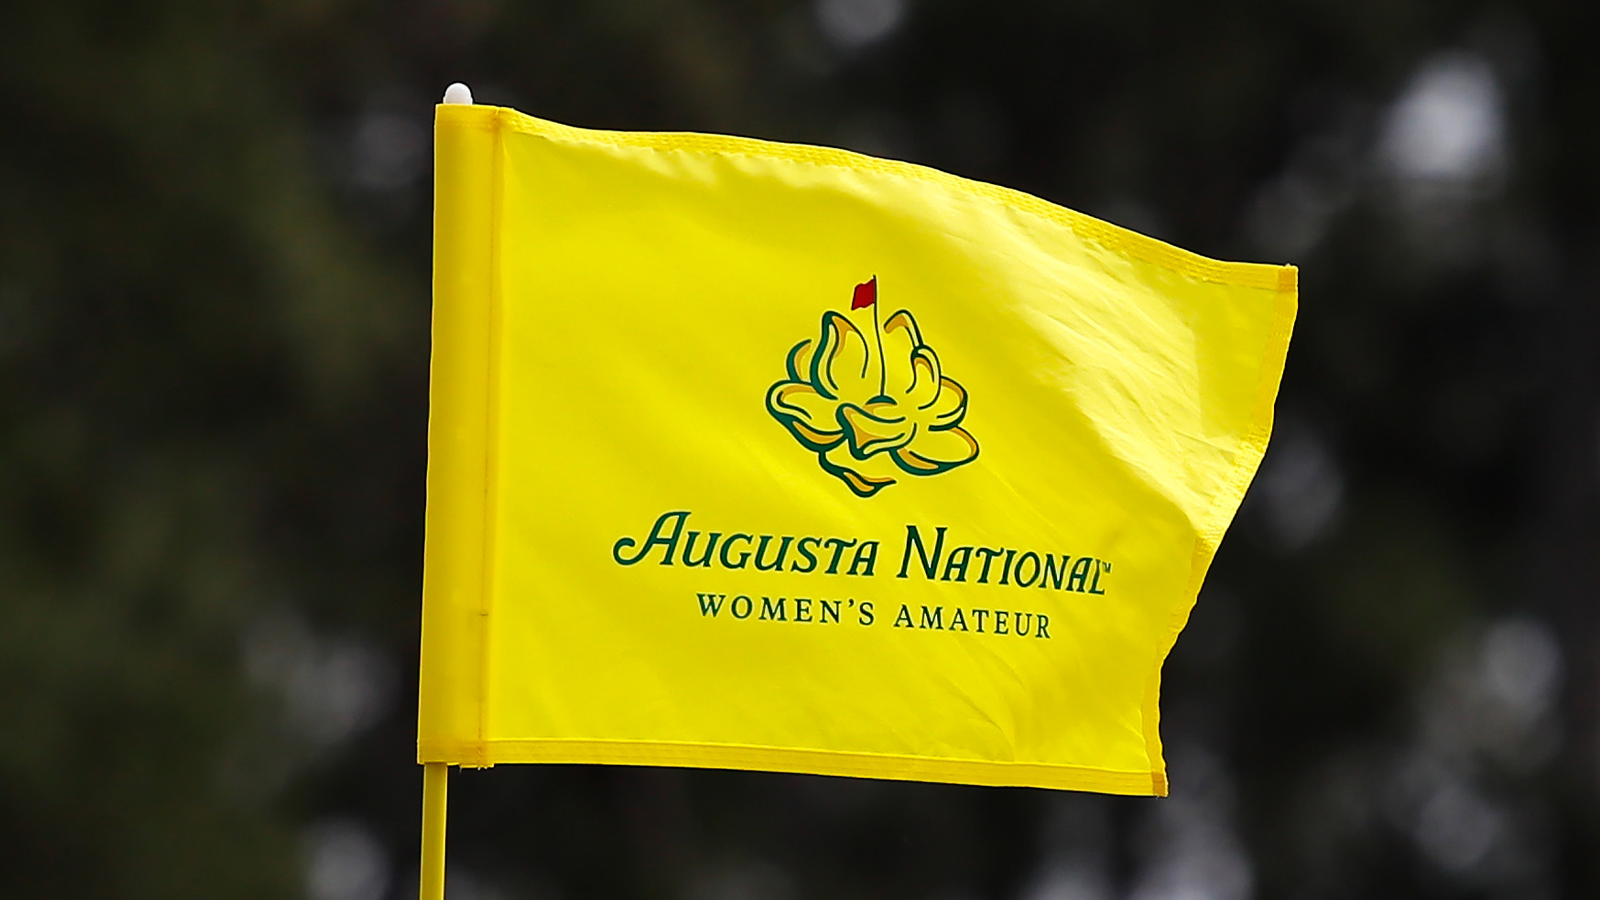 A pin flag is displayed during the final round of the 2022 Augusta National Women's Amateur at Augusta National Golf Club. 